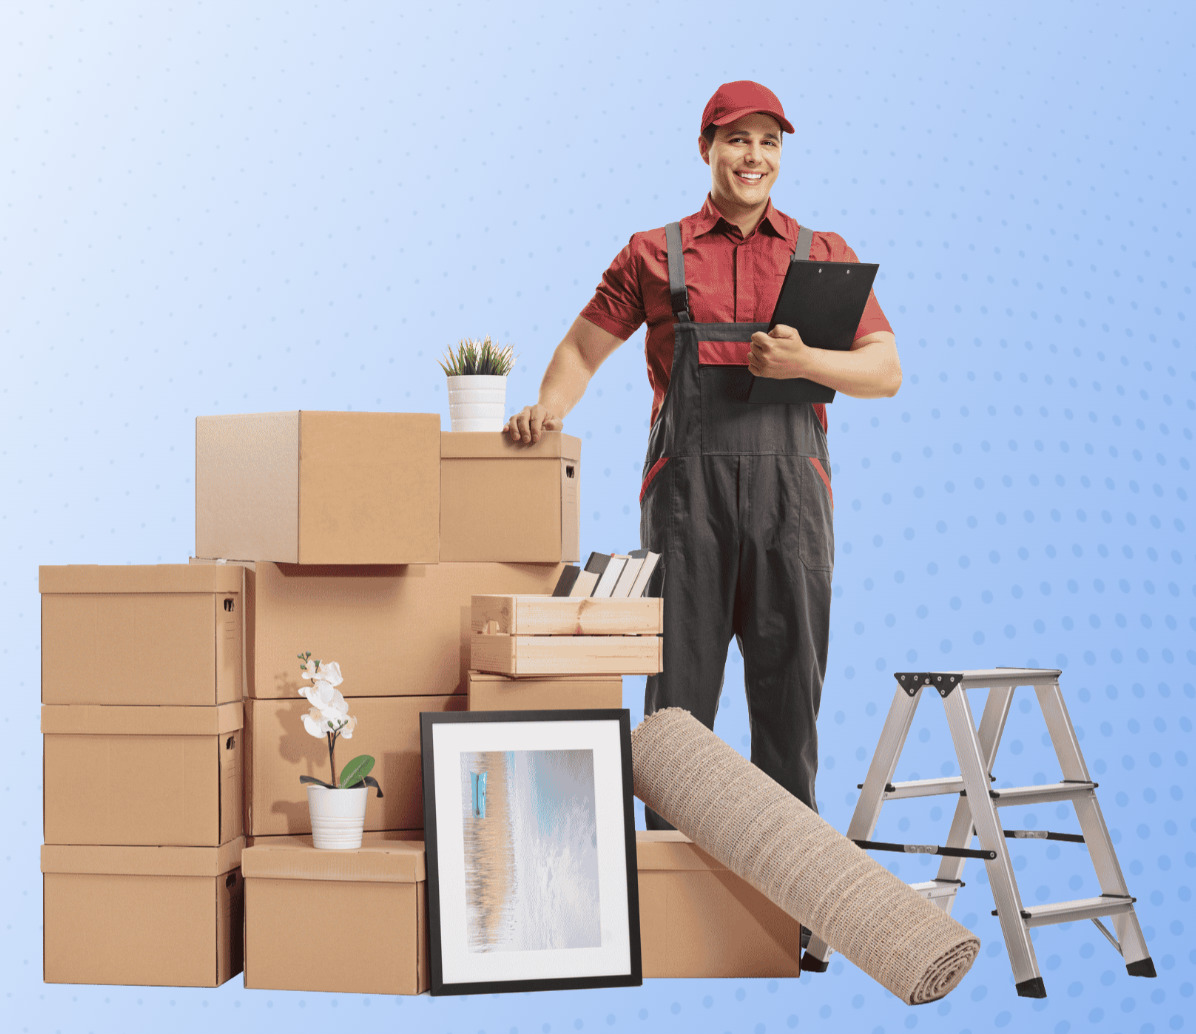 Top Moving And Storage Inc. For over 10 years, the San Jose based company has become the name of choice for people in the area for all their packing and moving needs